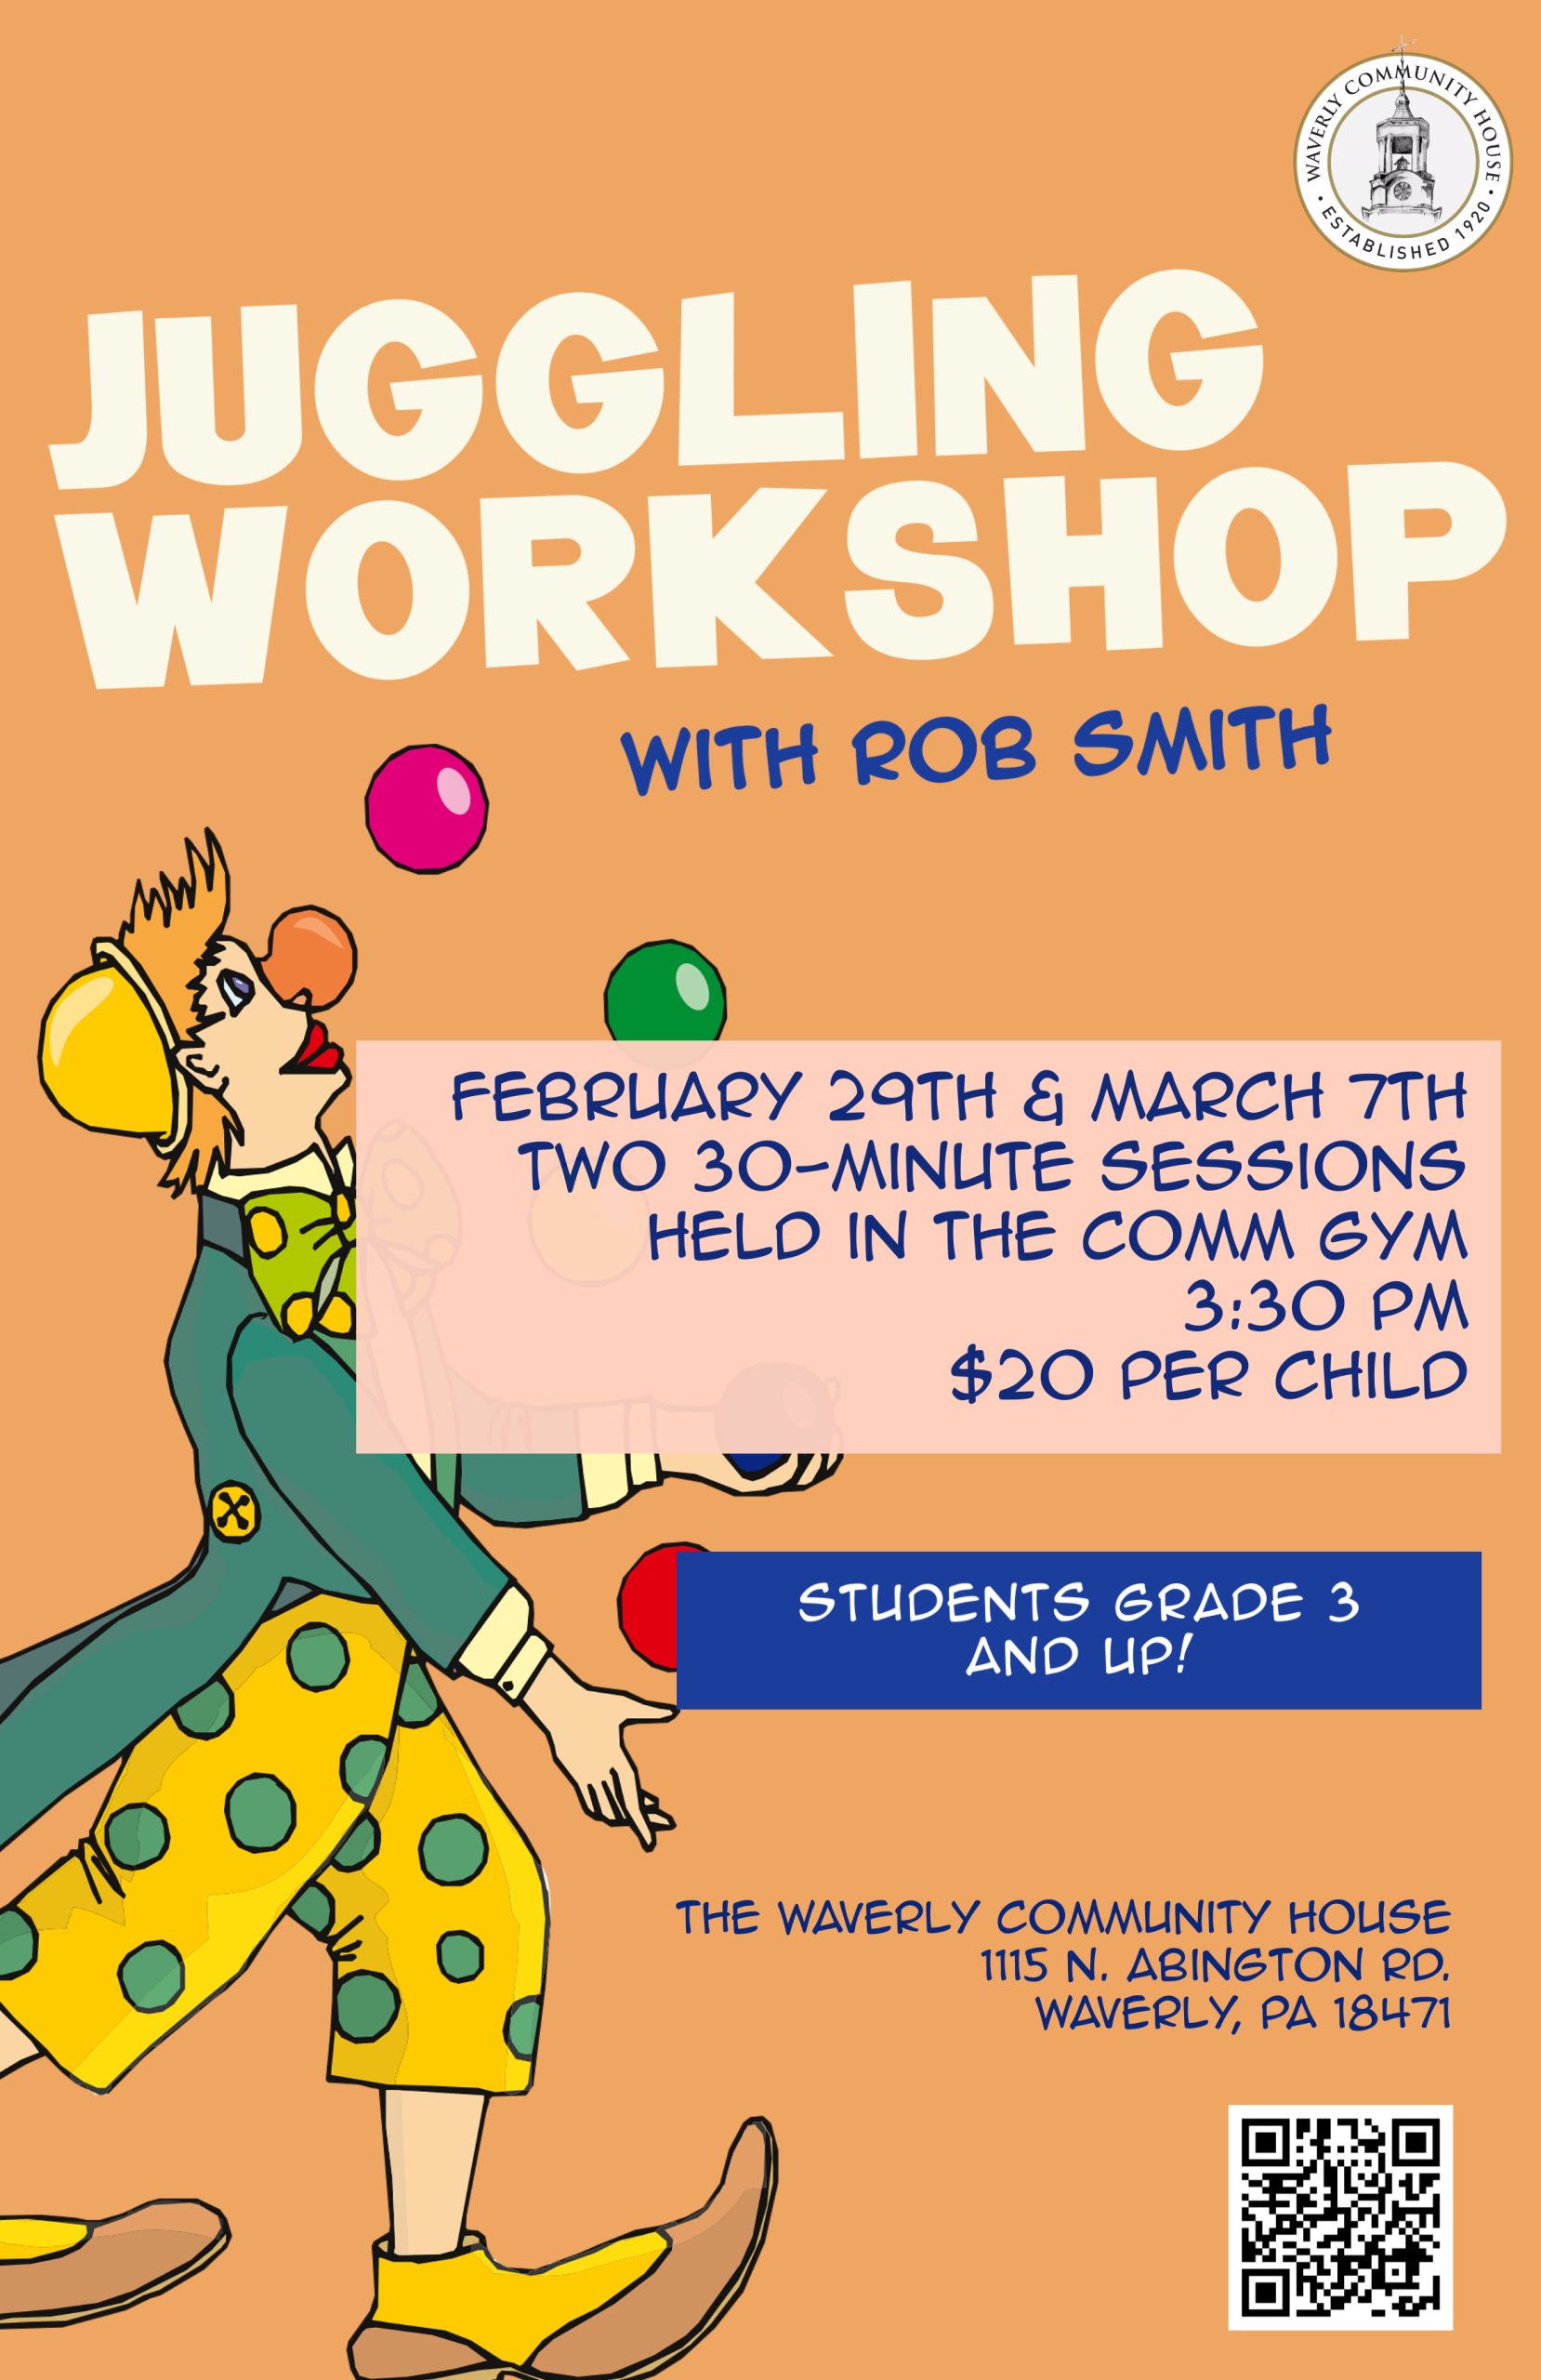 Juggling Workshop with Rob Smith